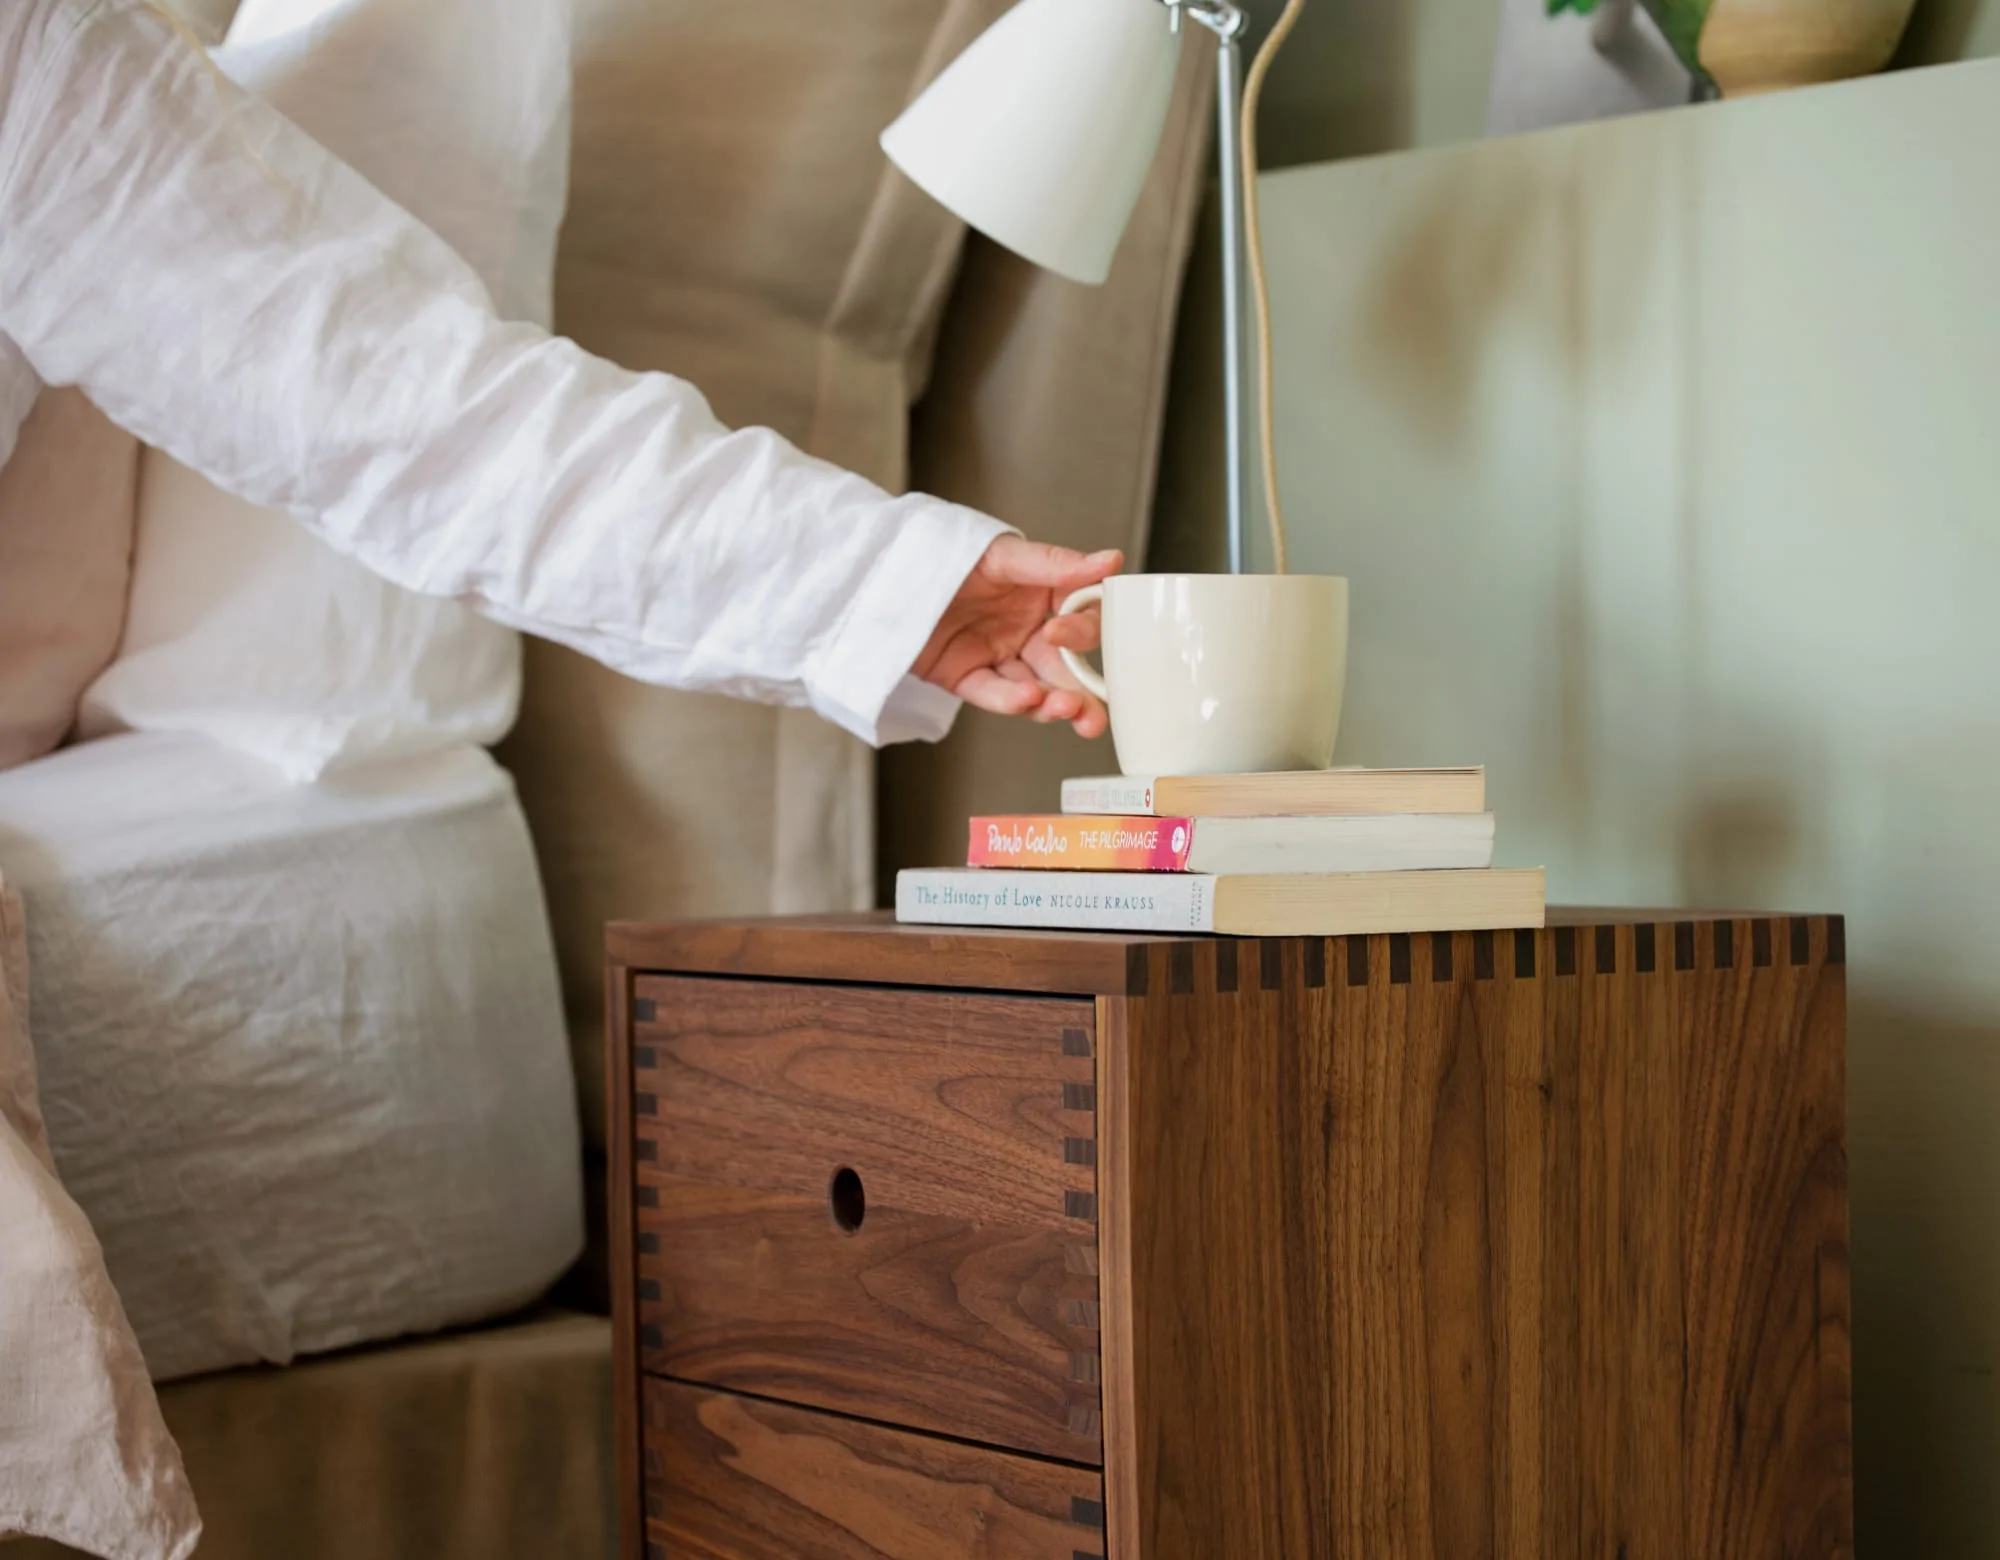 How Tall Should a Nightstand Be? 5 Expert Tips